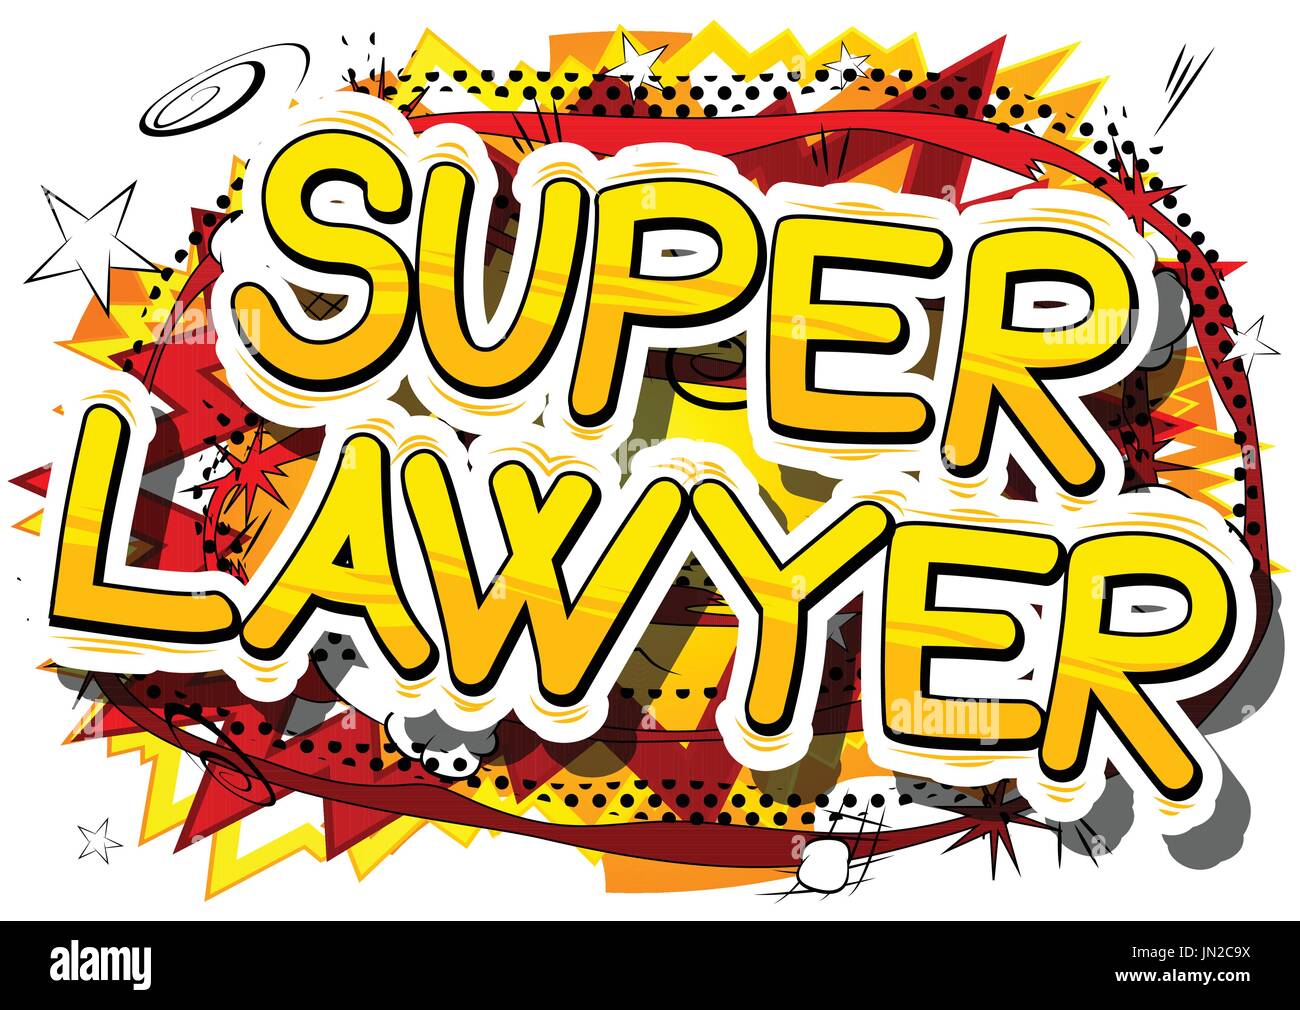 Super Lawyer - Comic book style phrase on abstract background. Stock Vector